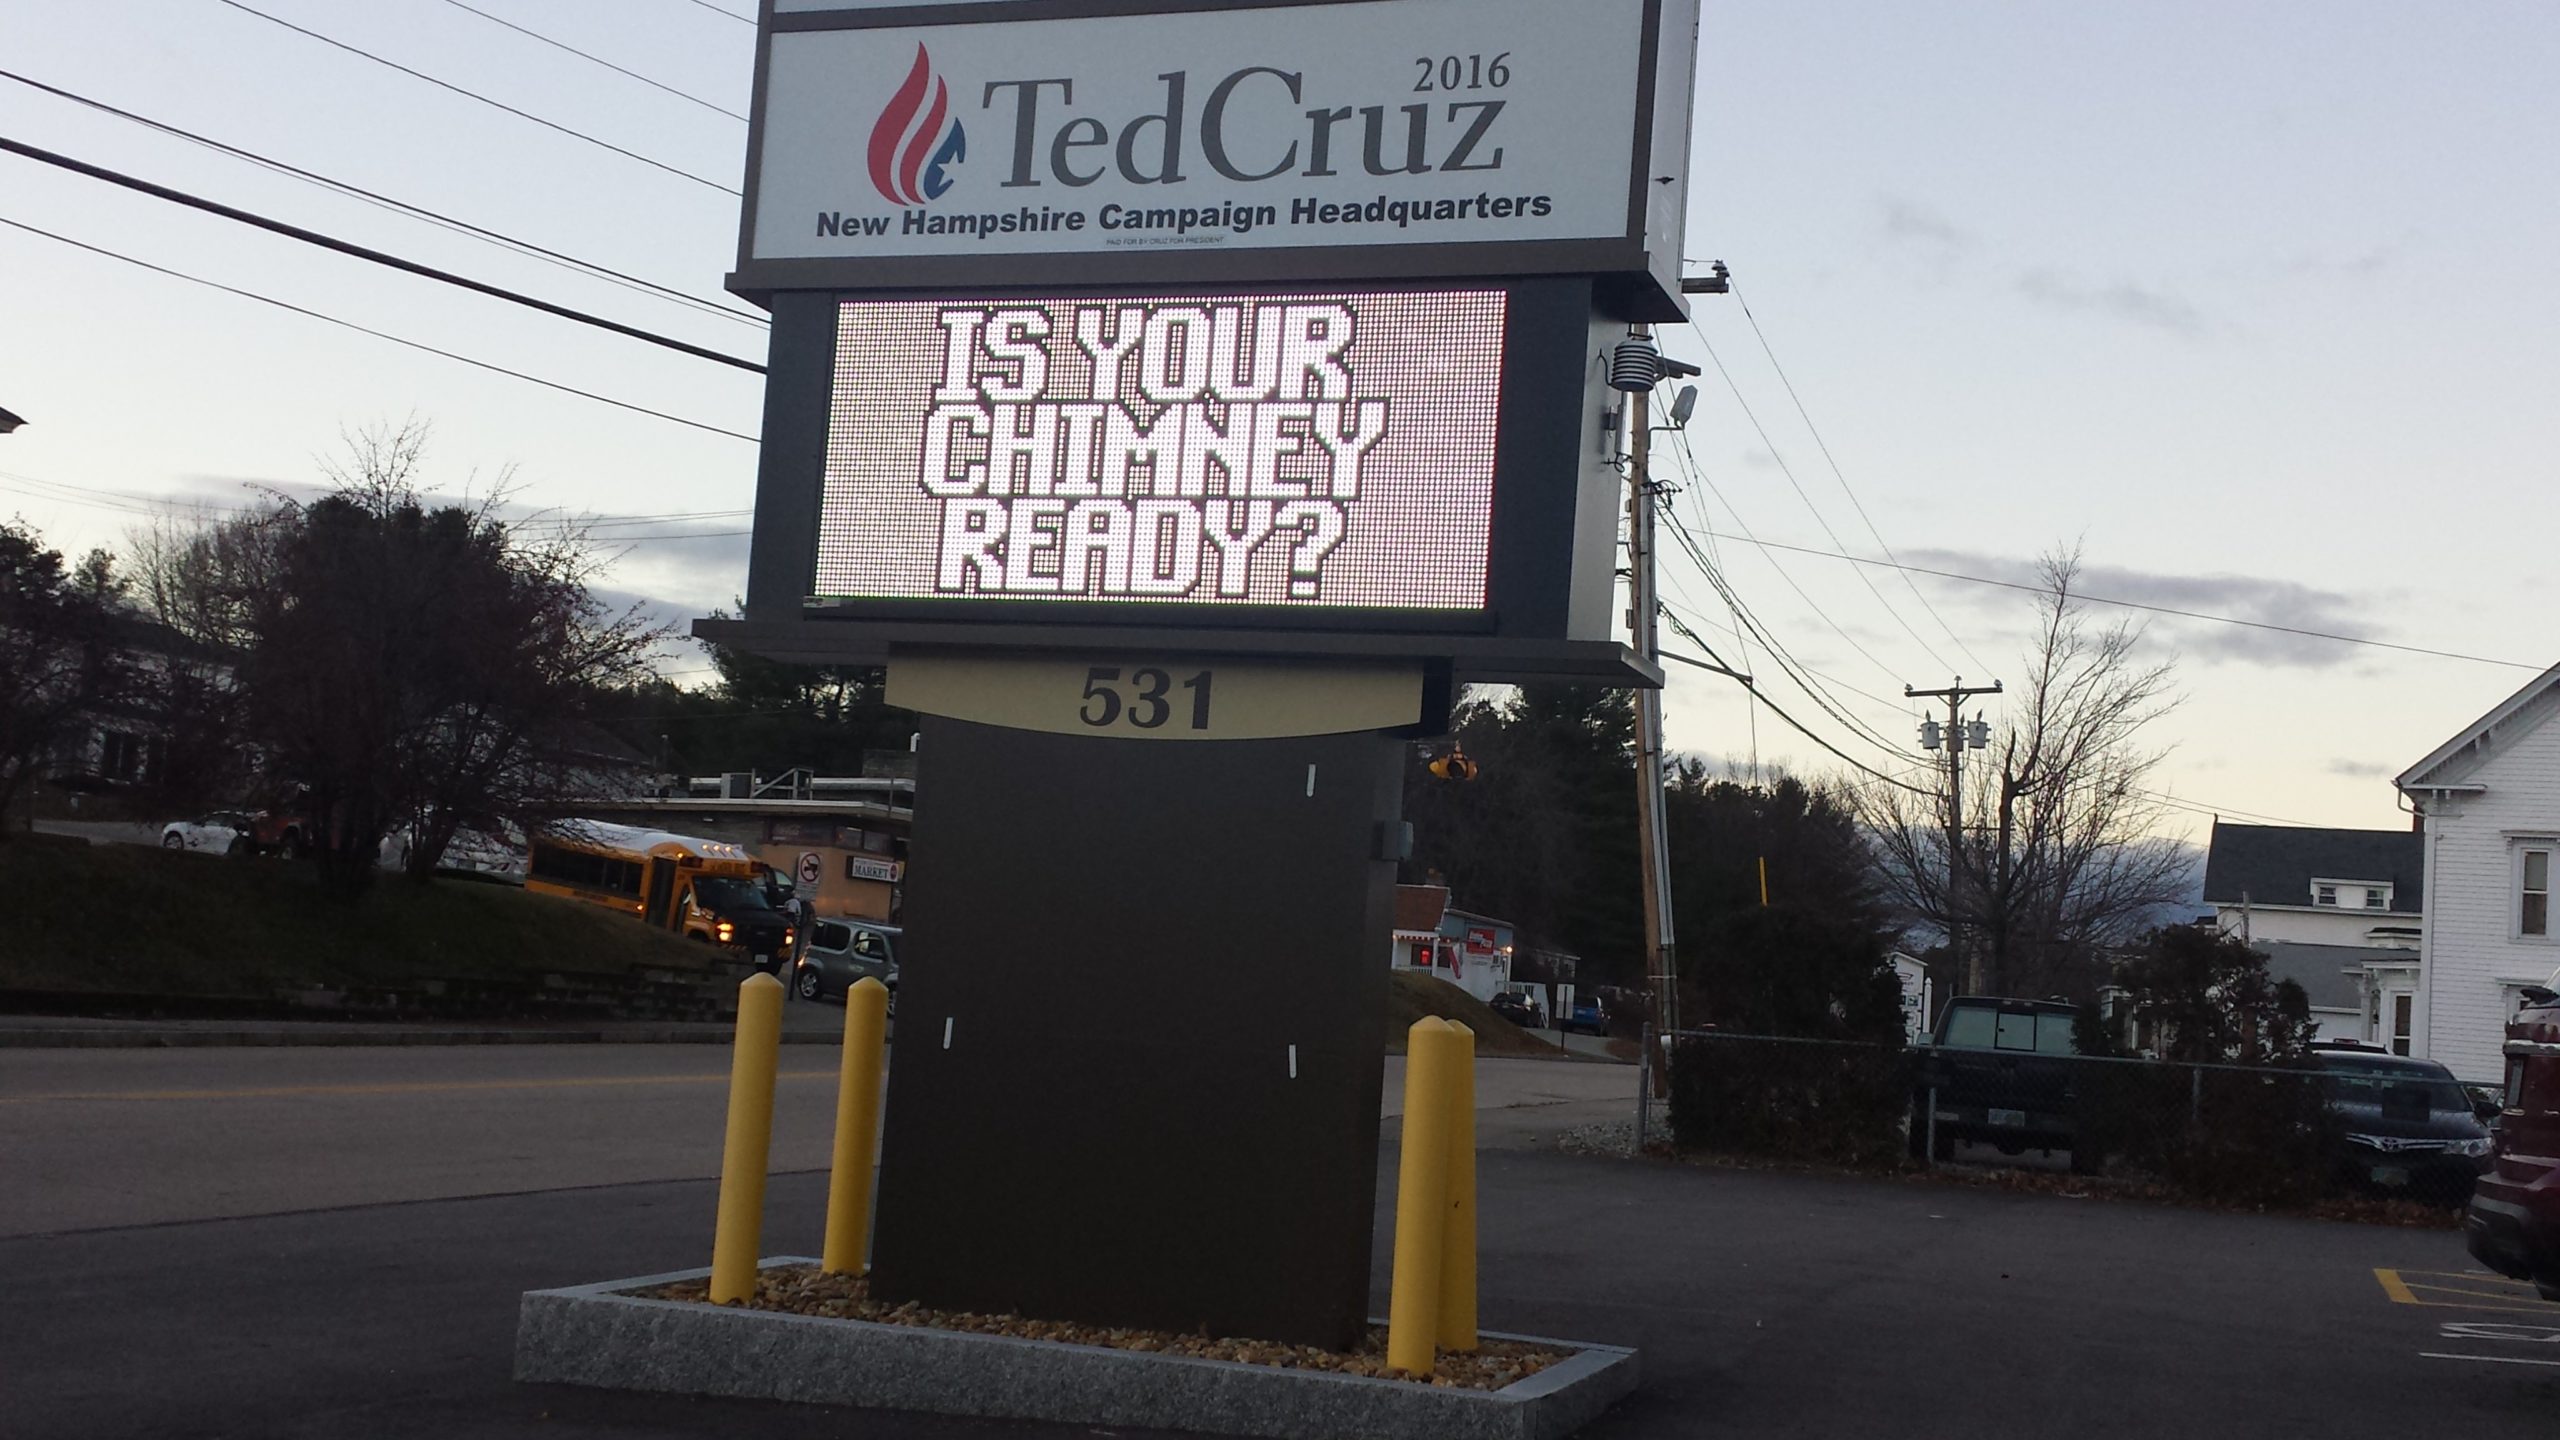 Sign says "Ted Cruz 2016." Underneath another sign says "Is your chimney ready?"